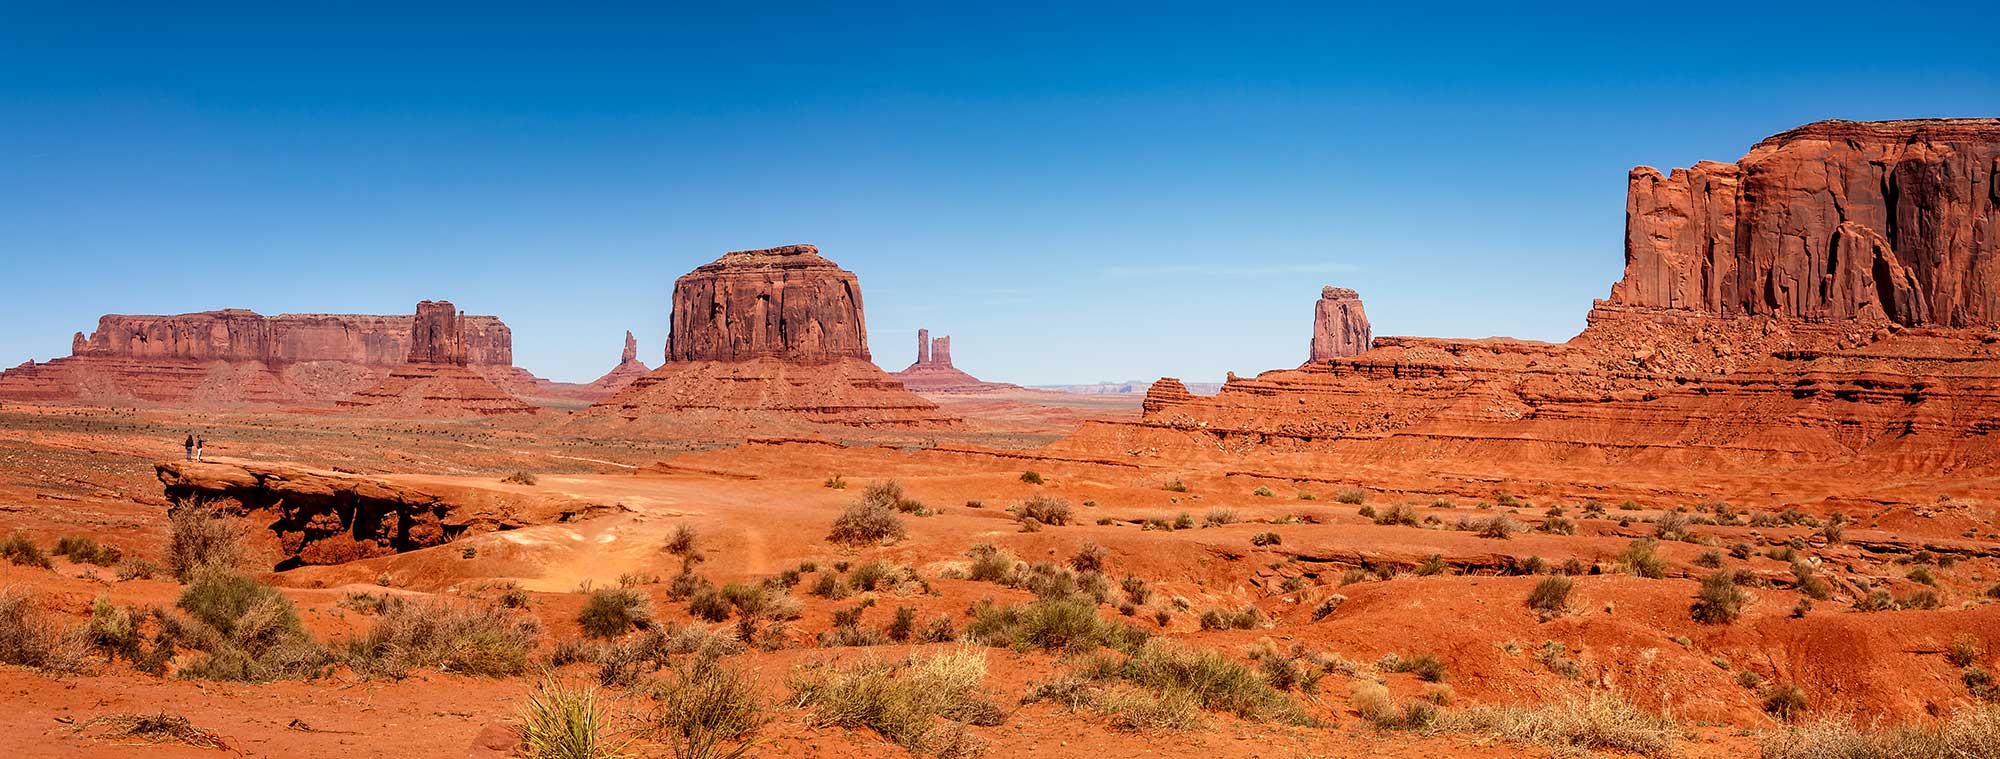 Valley of the Gods as seen on a Monument Valley tour